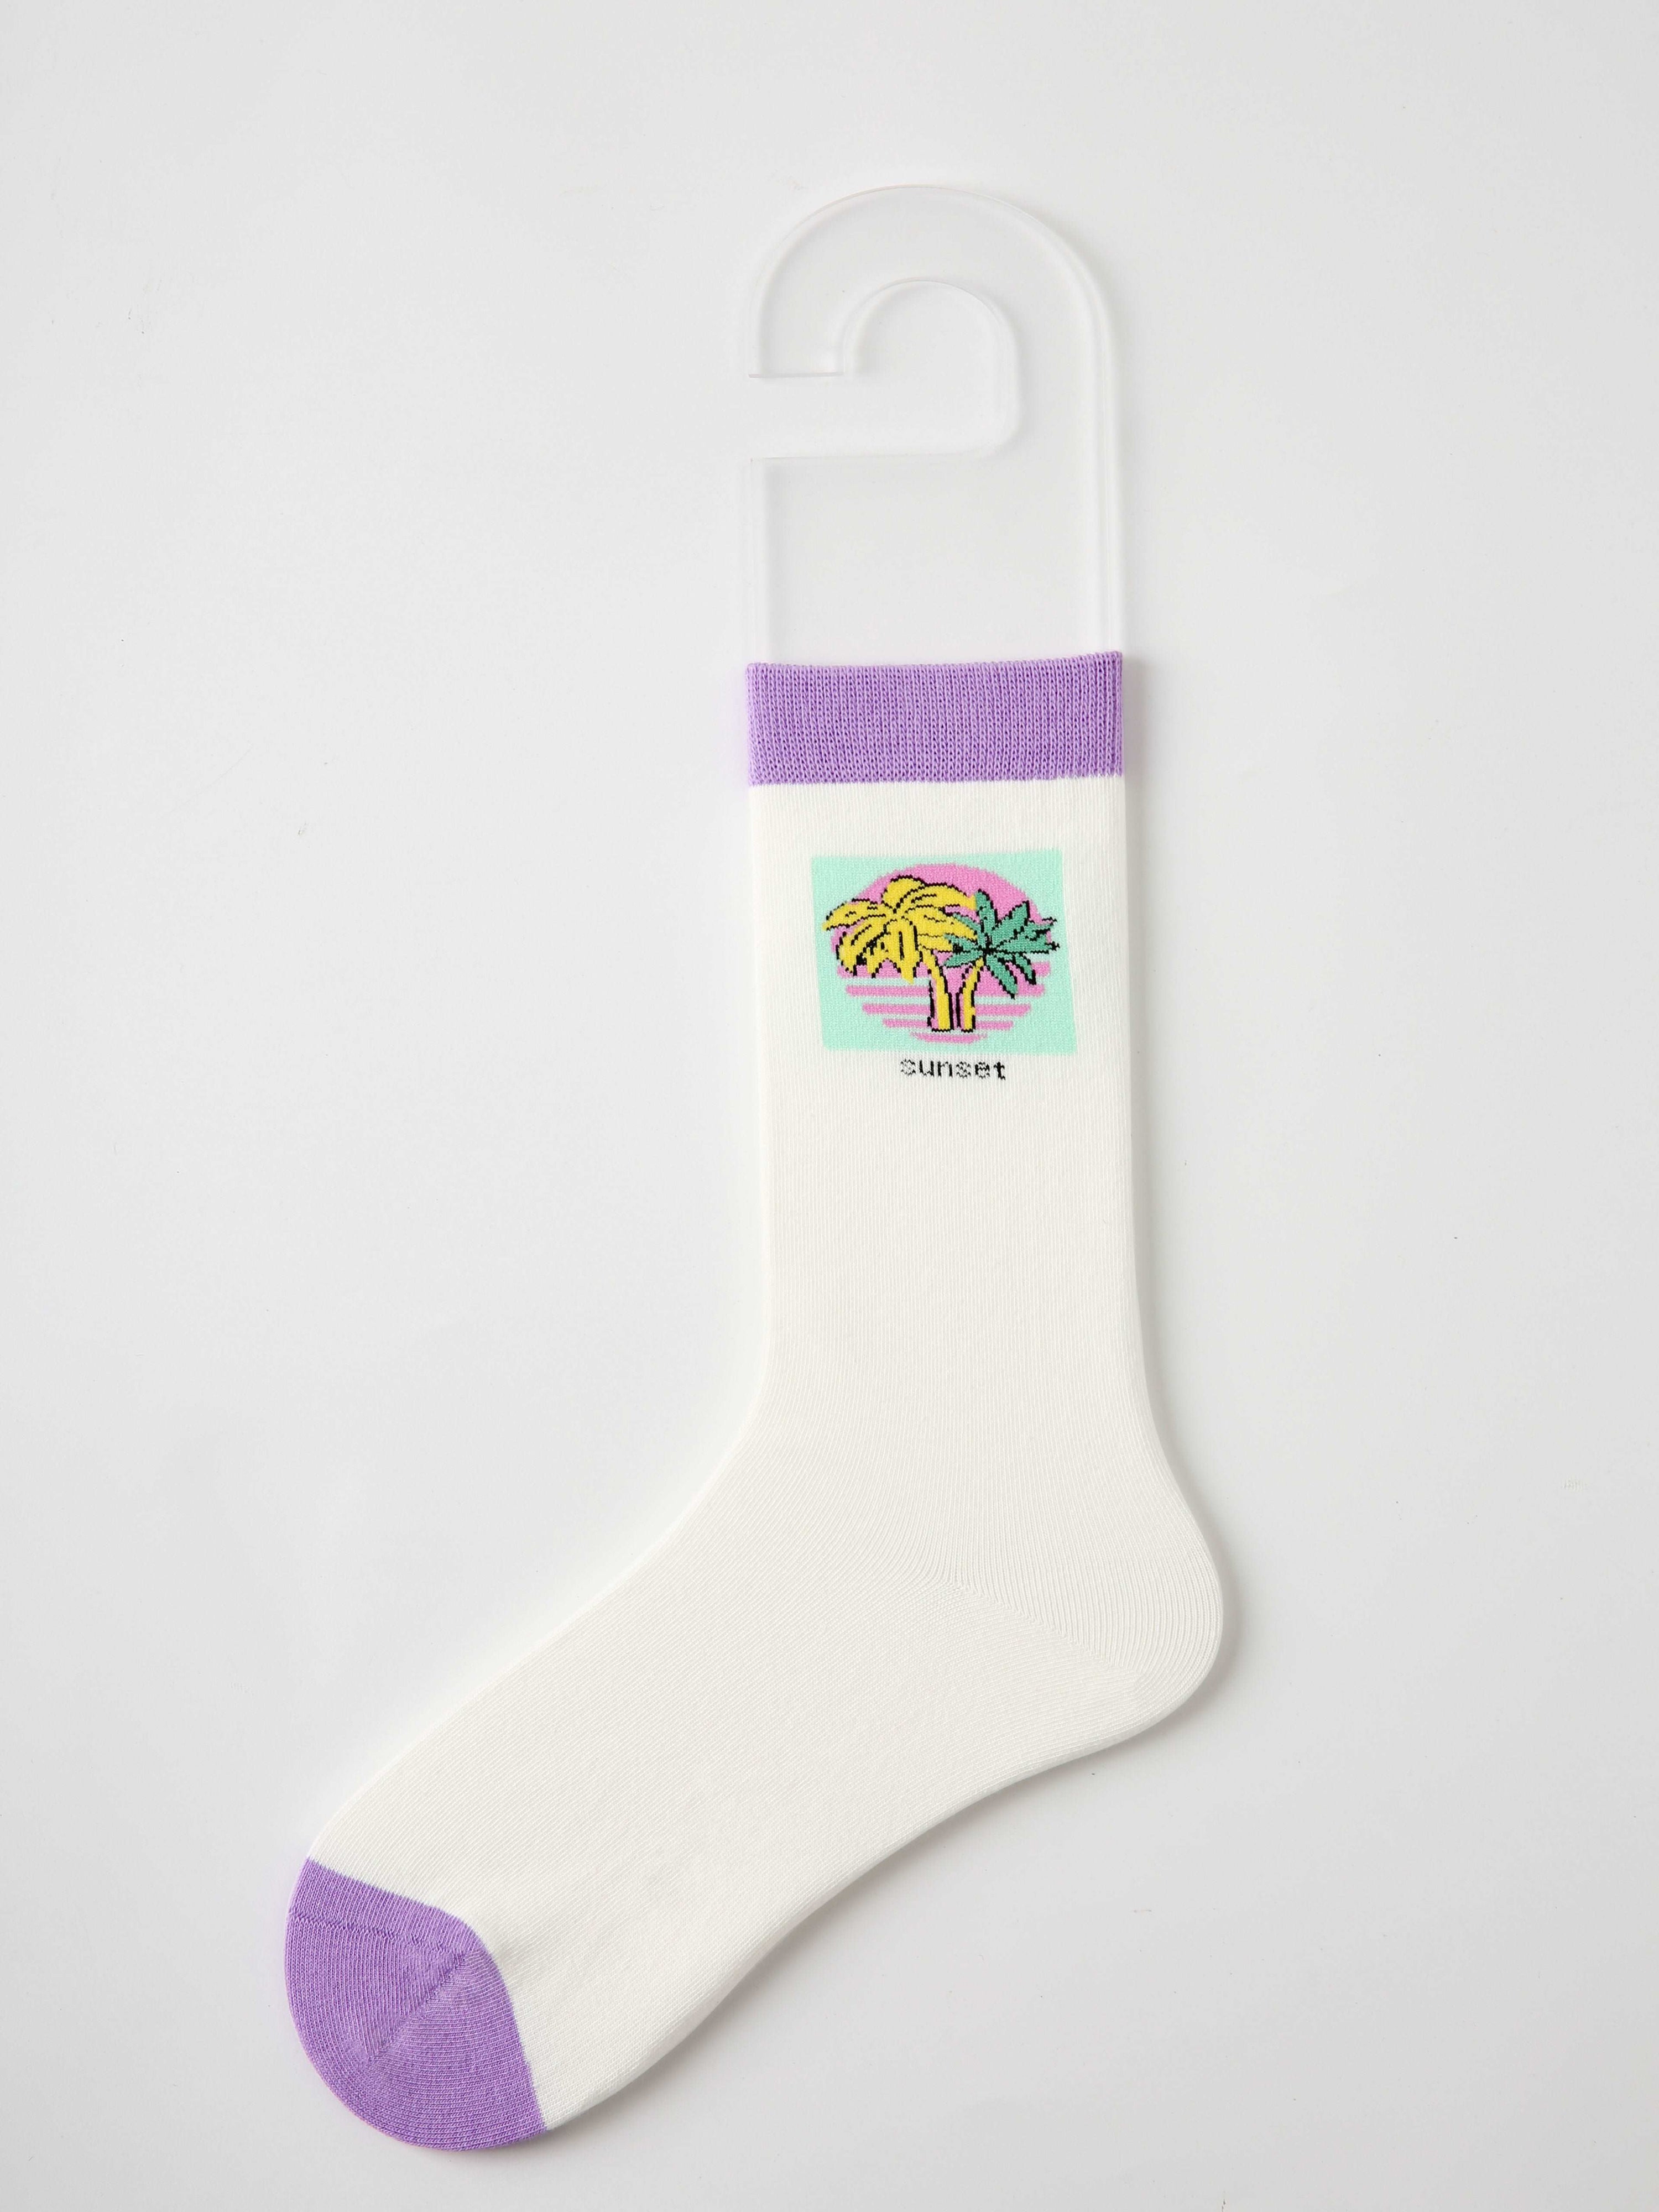 White sock with purple accents and a playful cartoon character